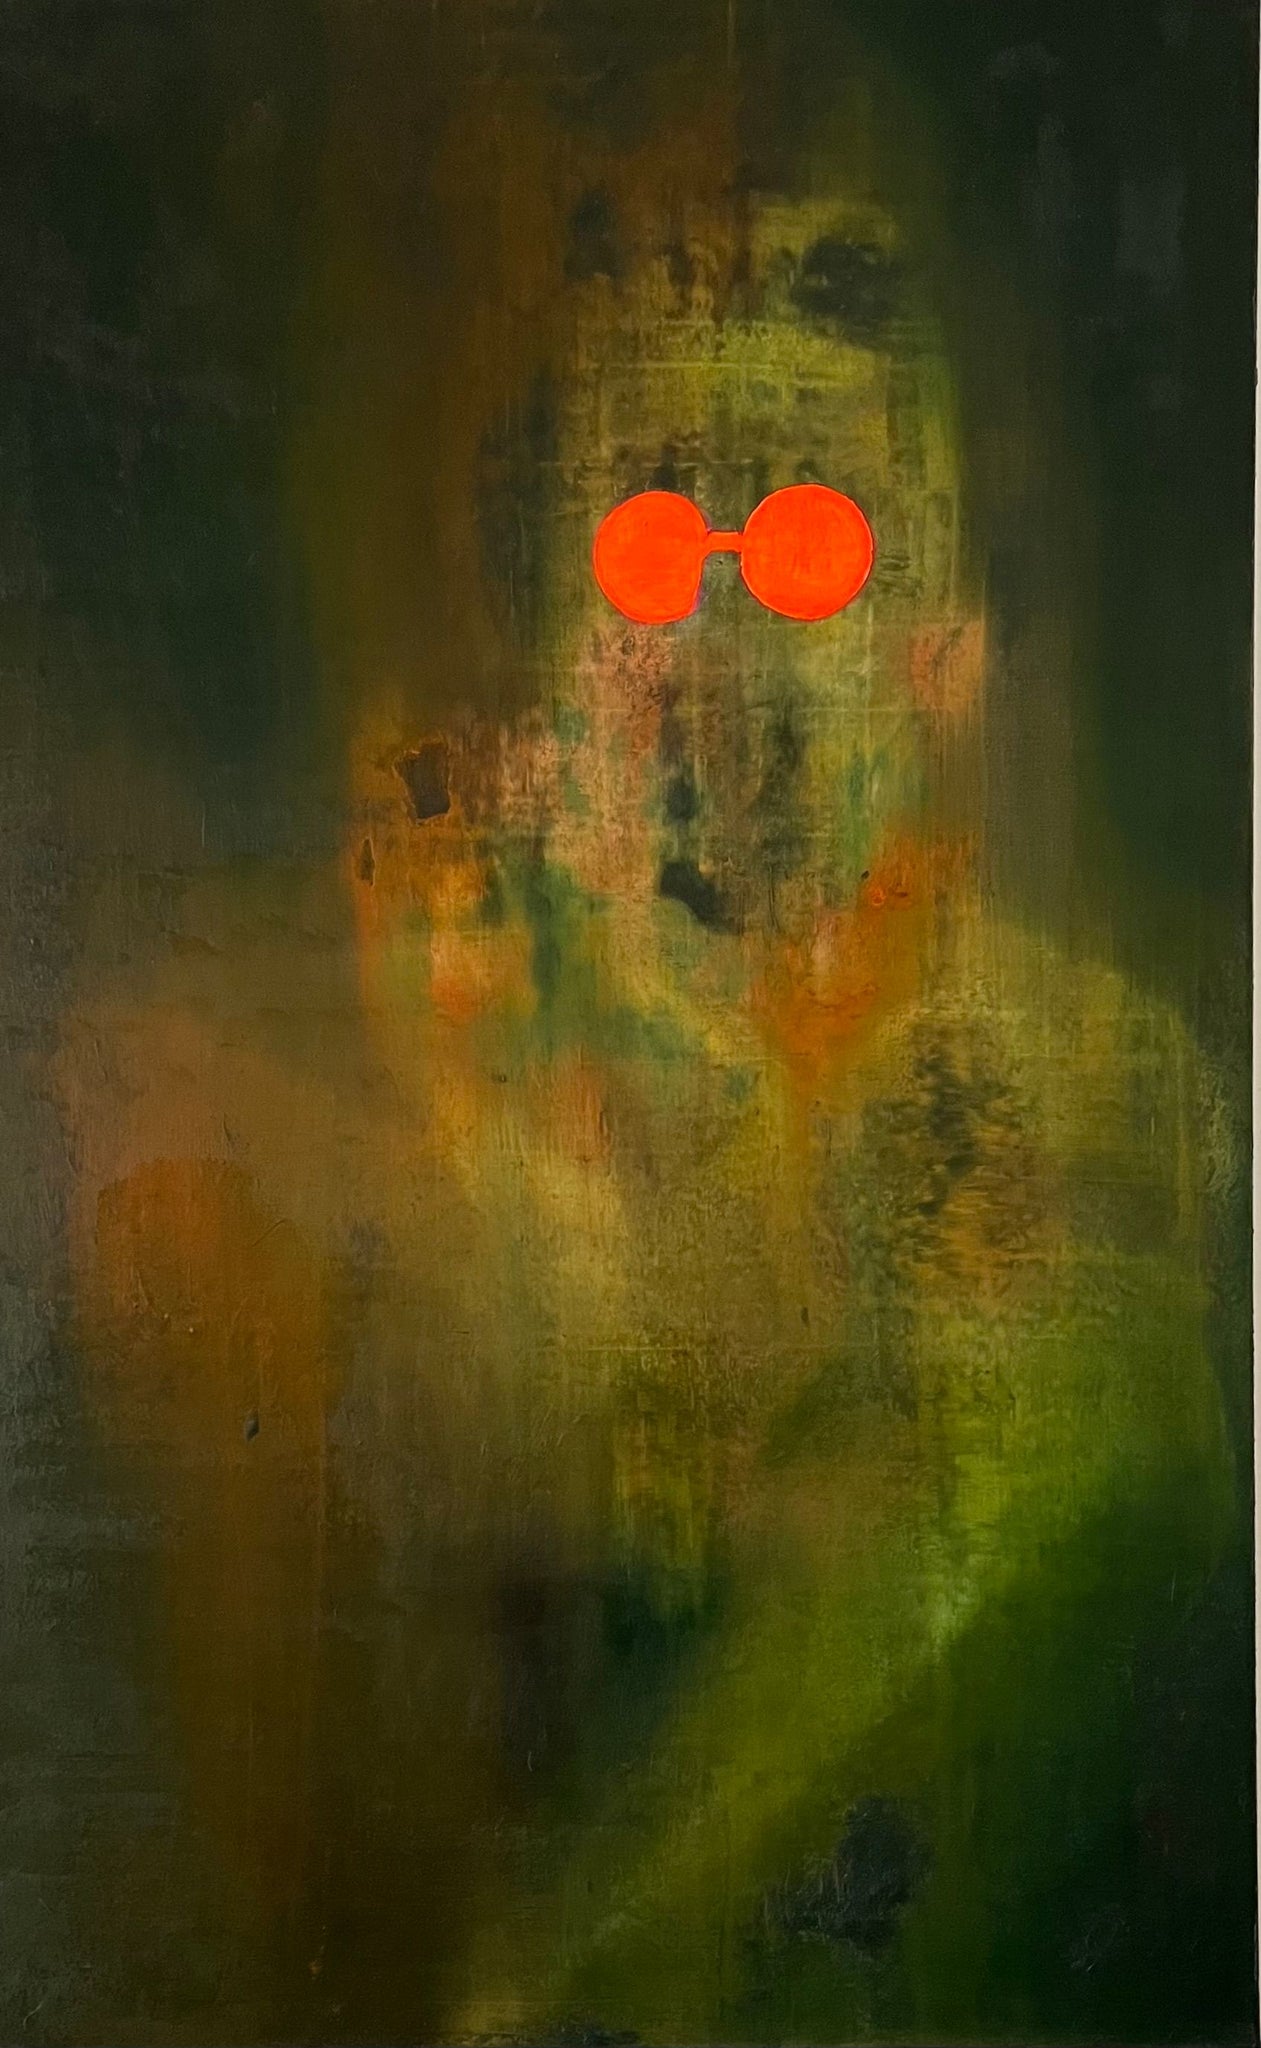 Franco Andrés, "Seated Figure With Atomic Tangerine Shades"